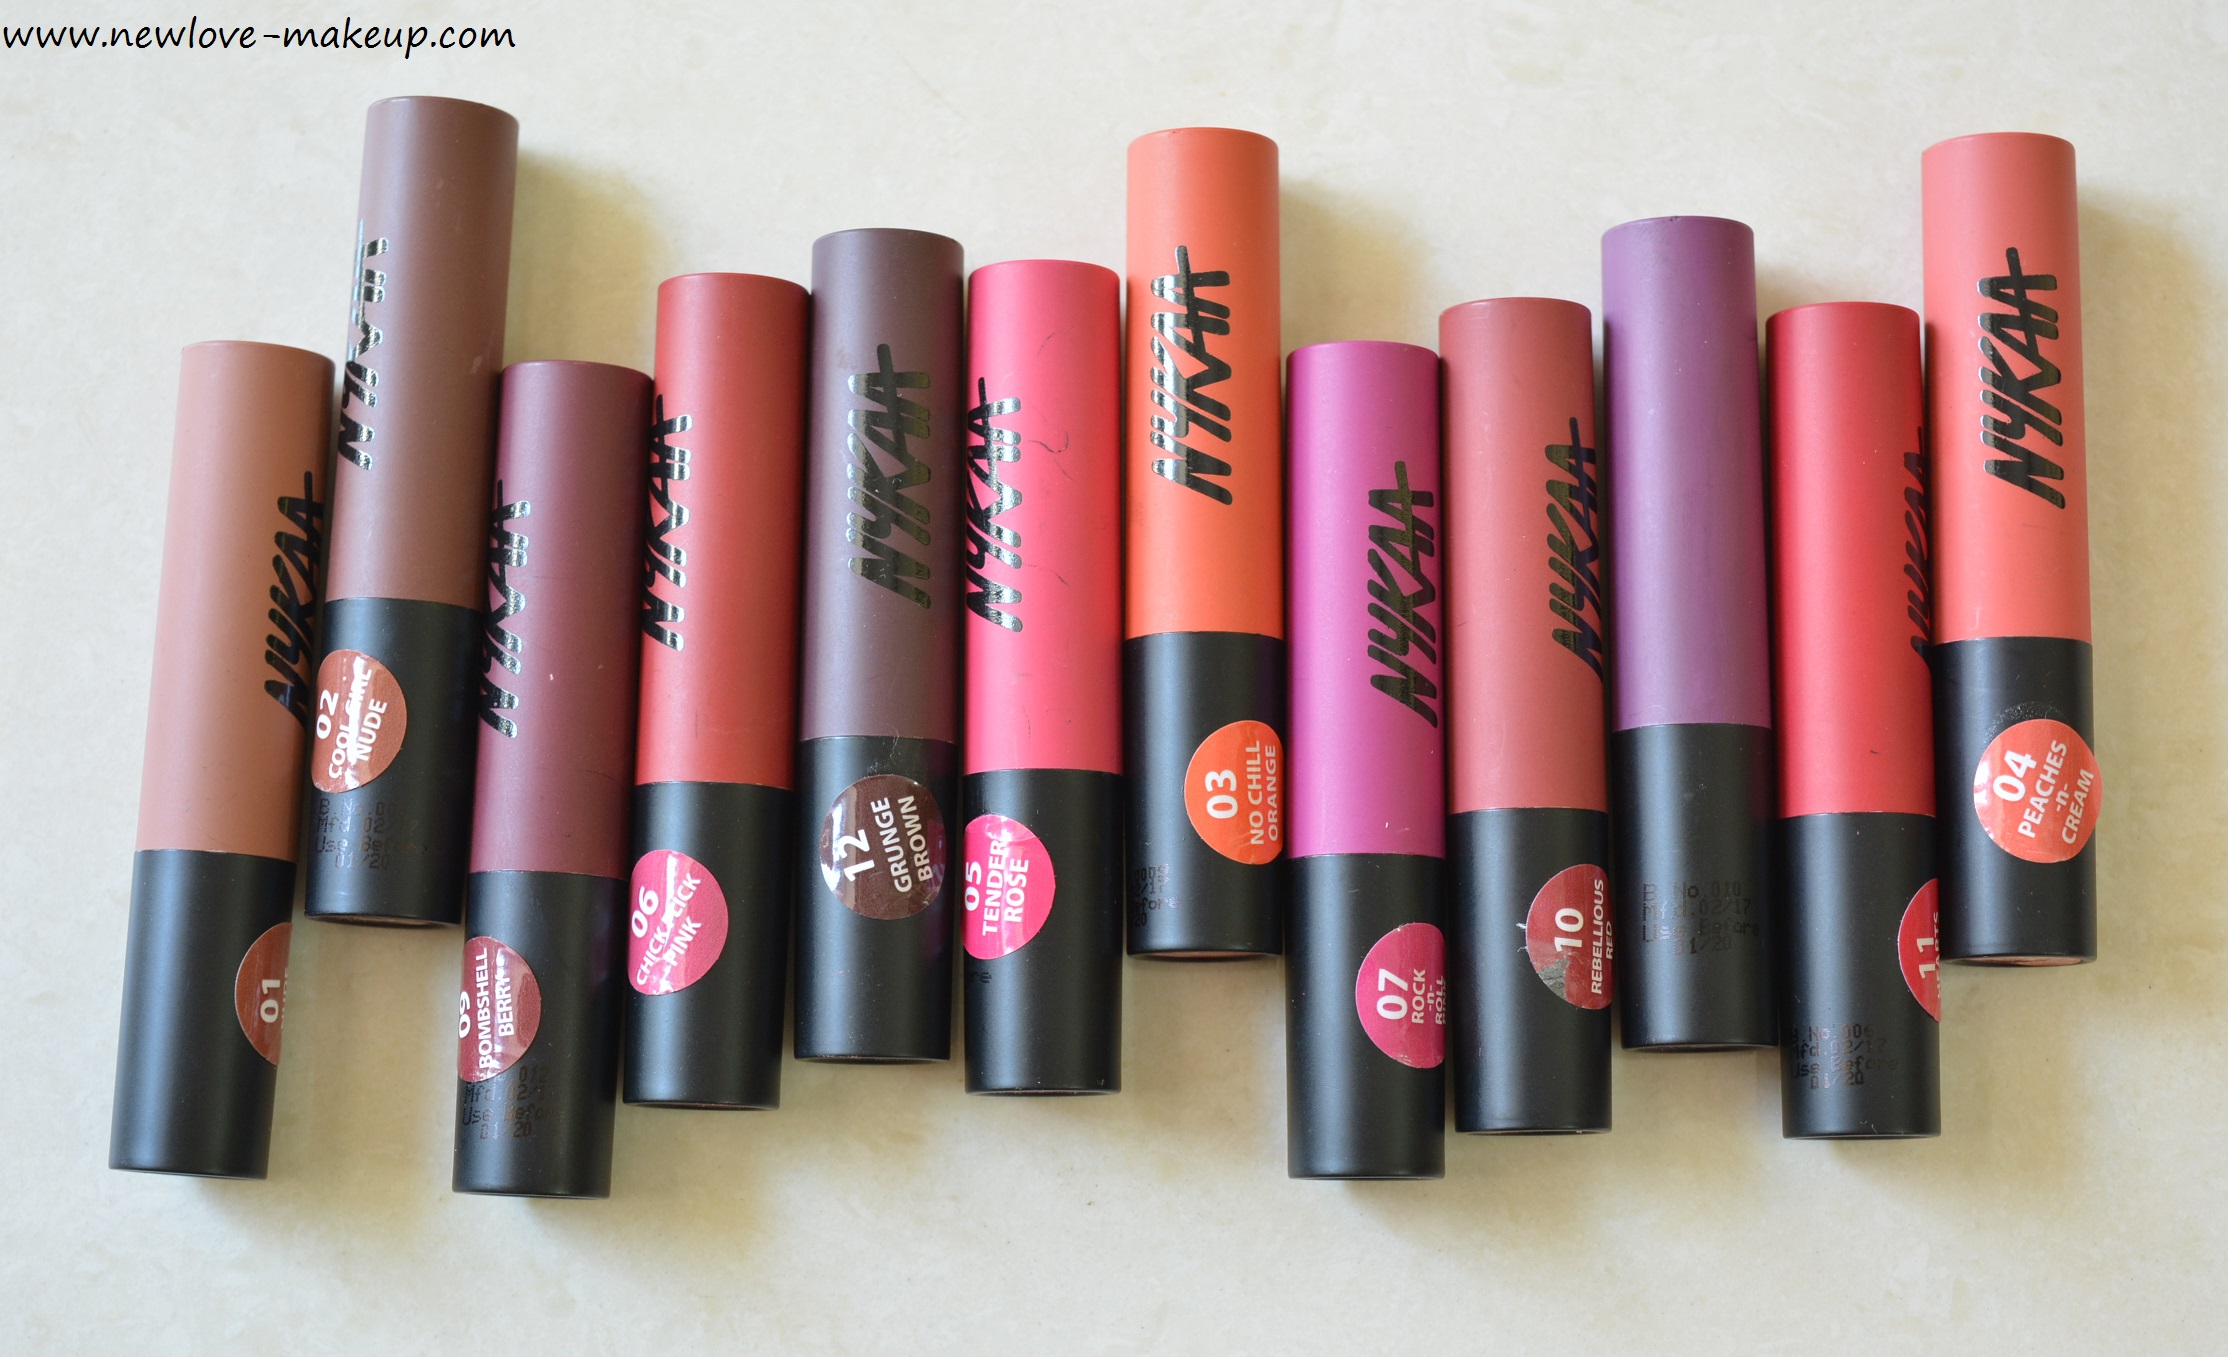 All Nykaa PaintStix Review, Swatches.